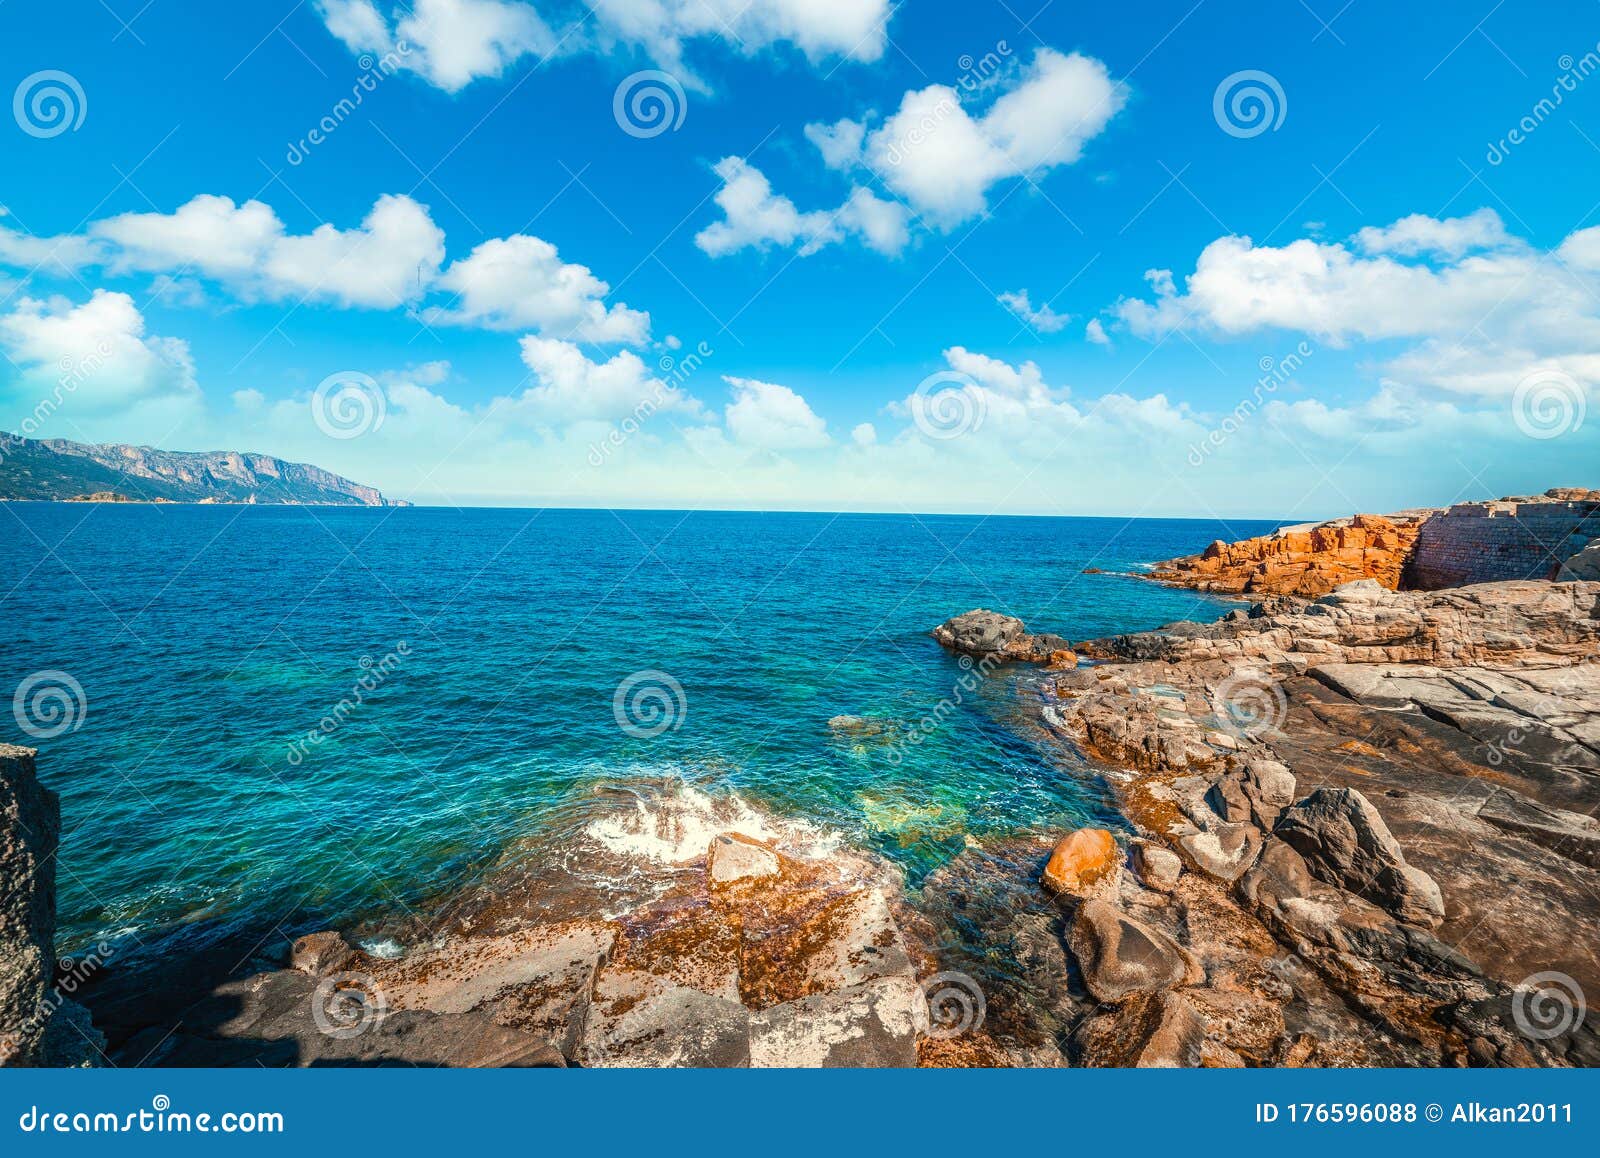 cloudy sky over rocce rosse shore in sardinia